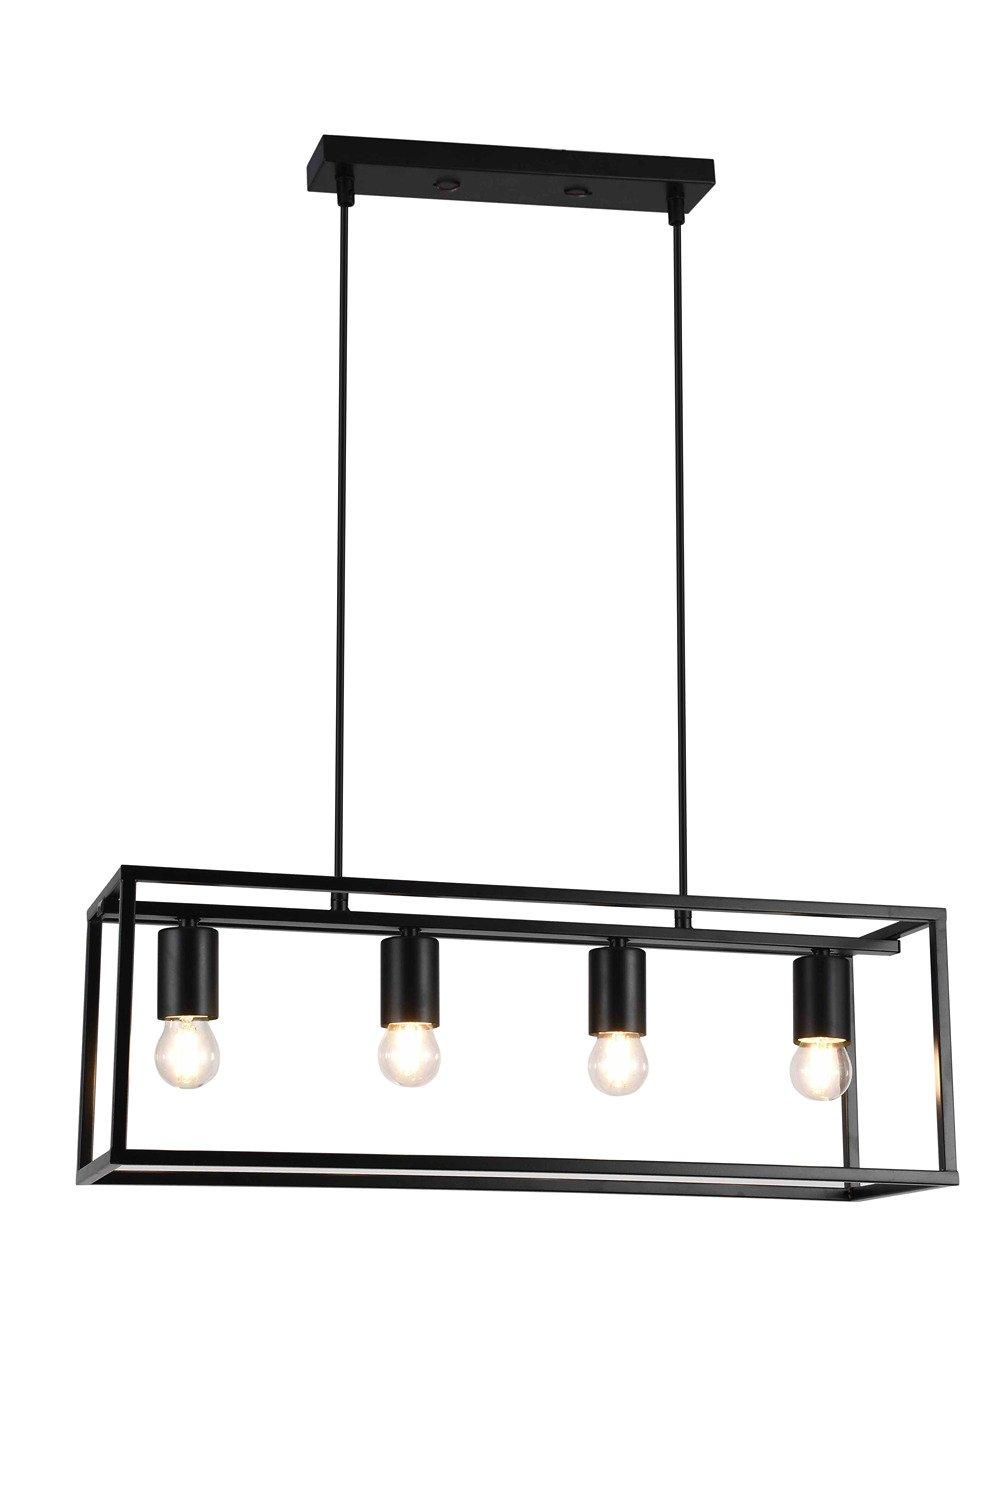 Molly Large Black Industrial Style Suspended Rectangular Ceiling Light